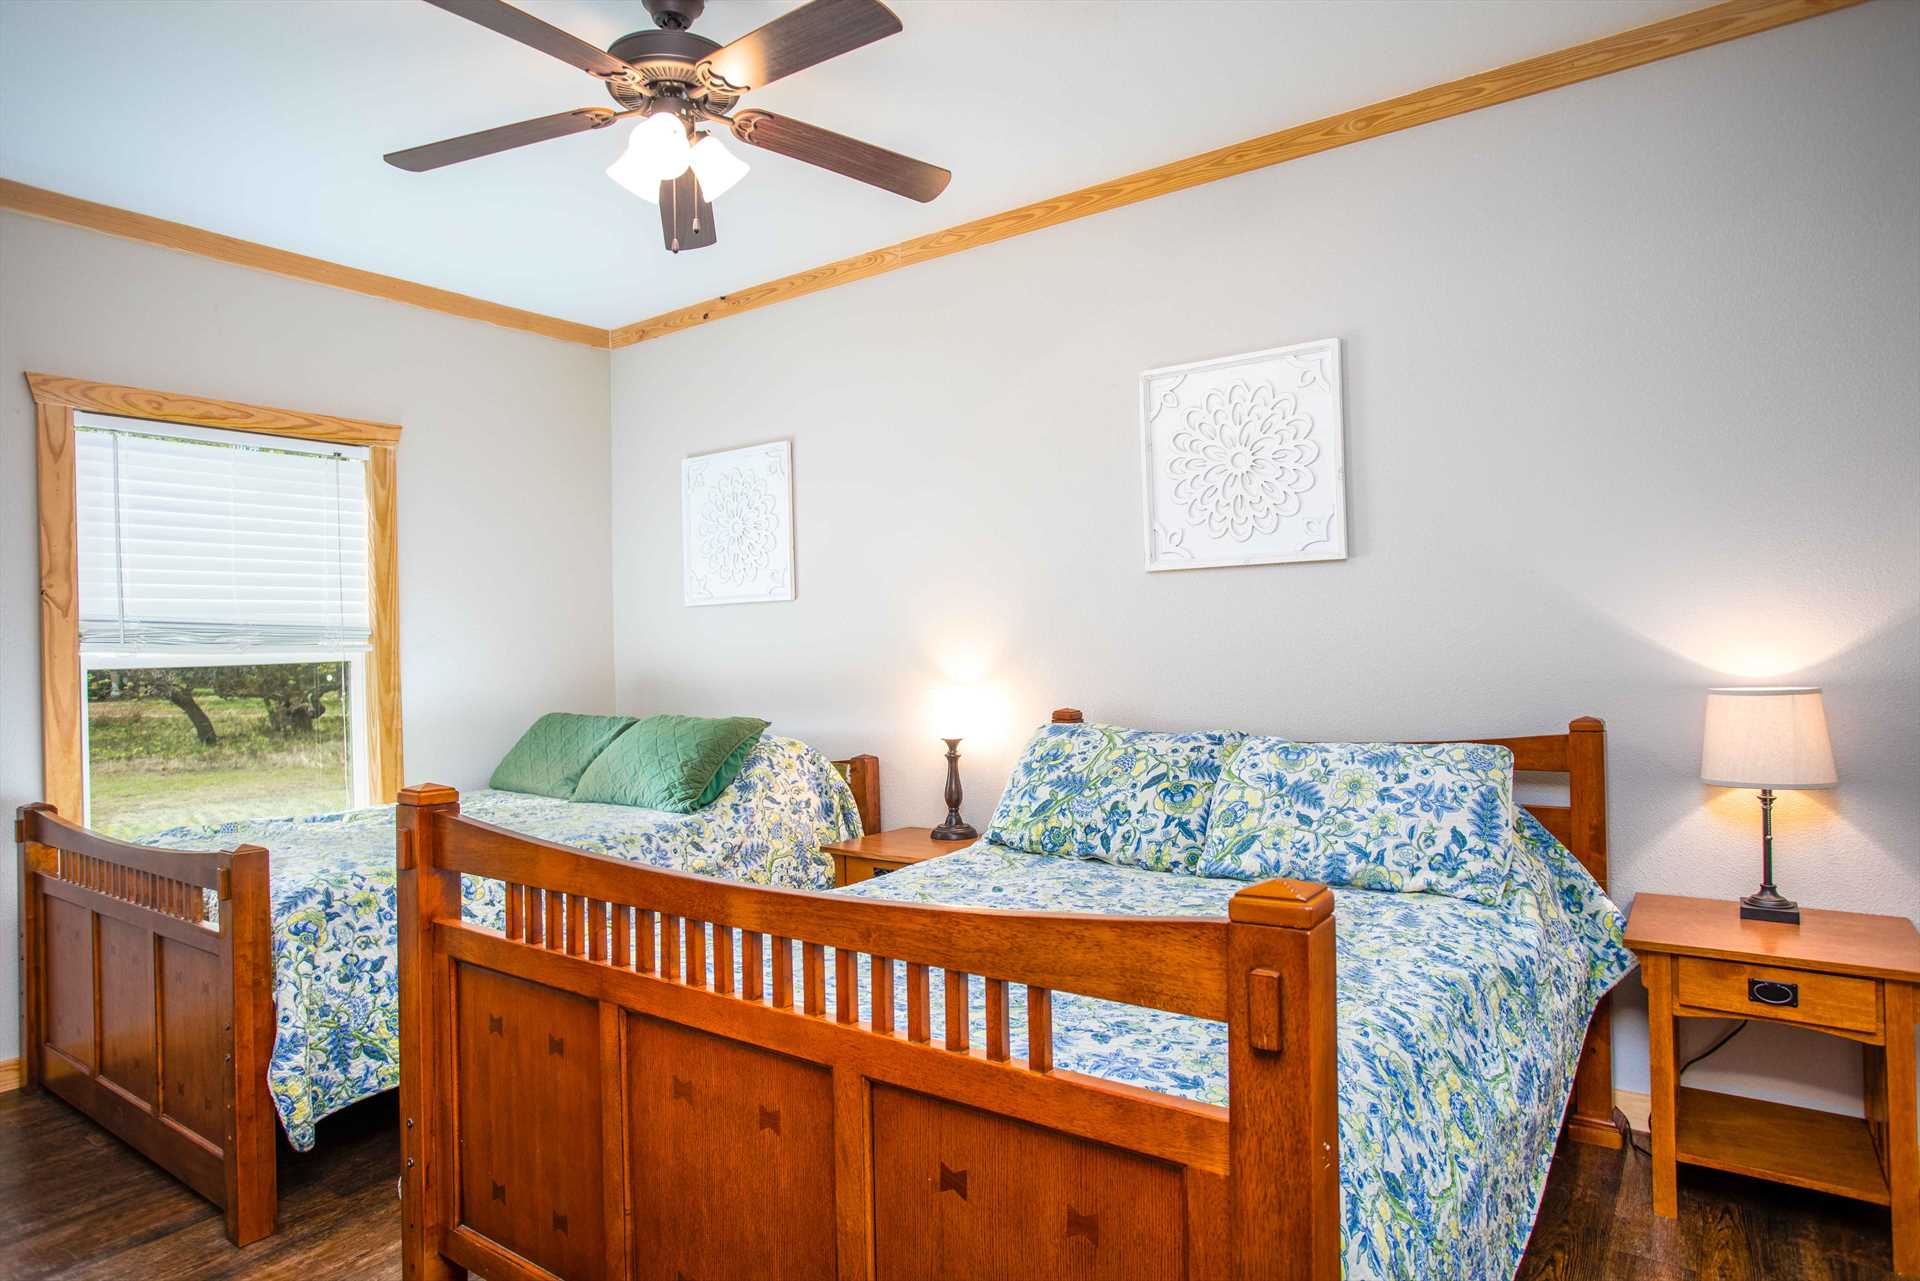                                                 Two plush and comfy full-sized beds in the second bedroom offer restful slumber after an adventurous day!